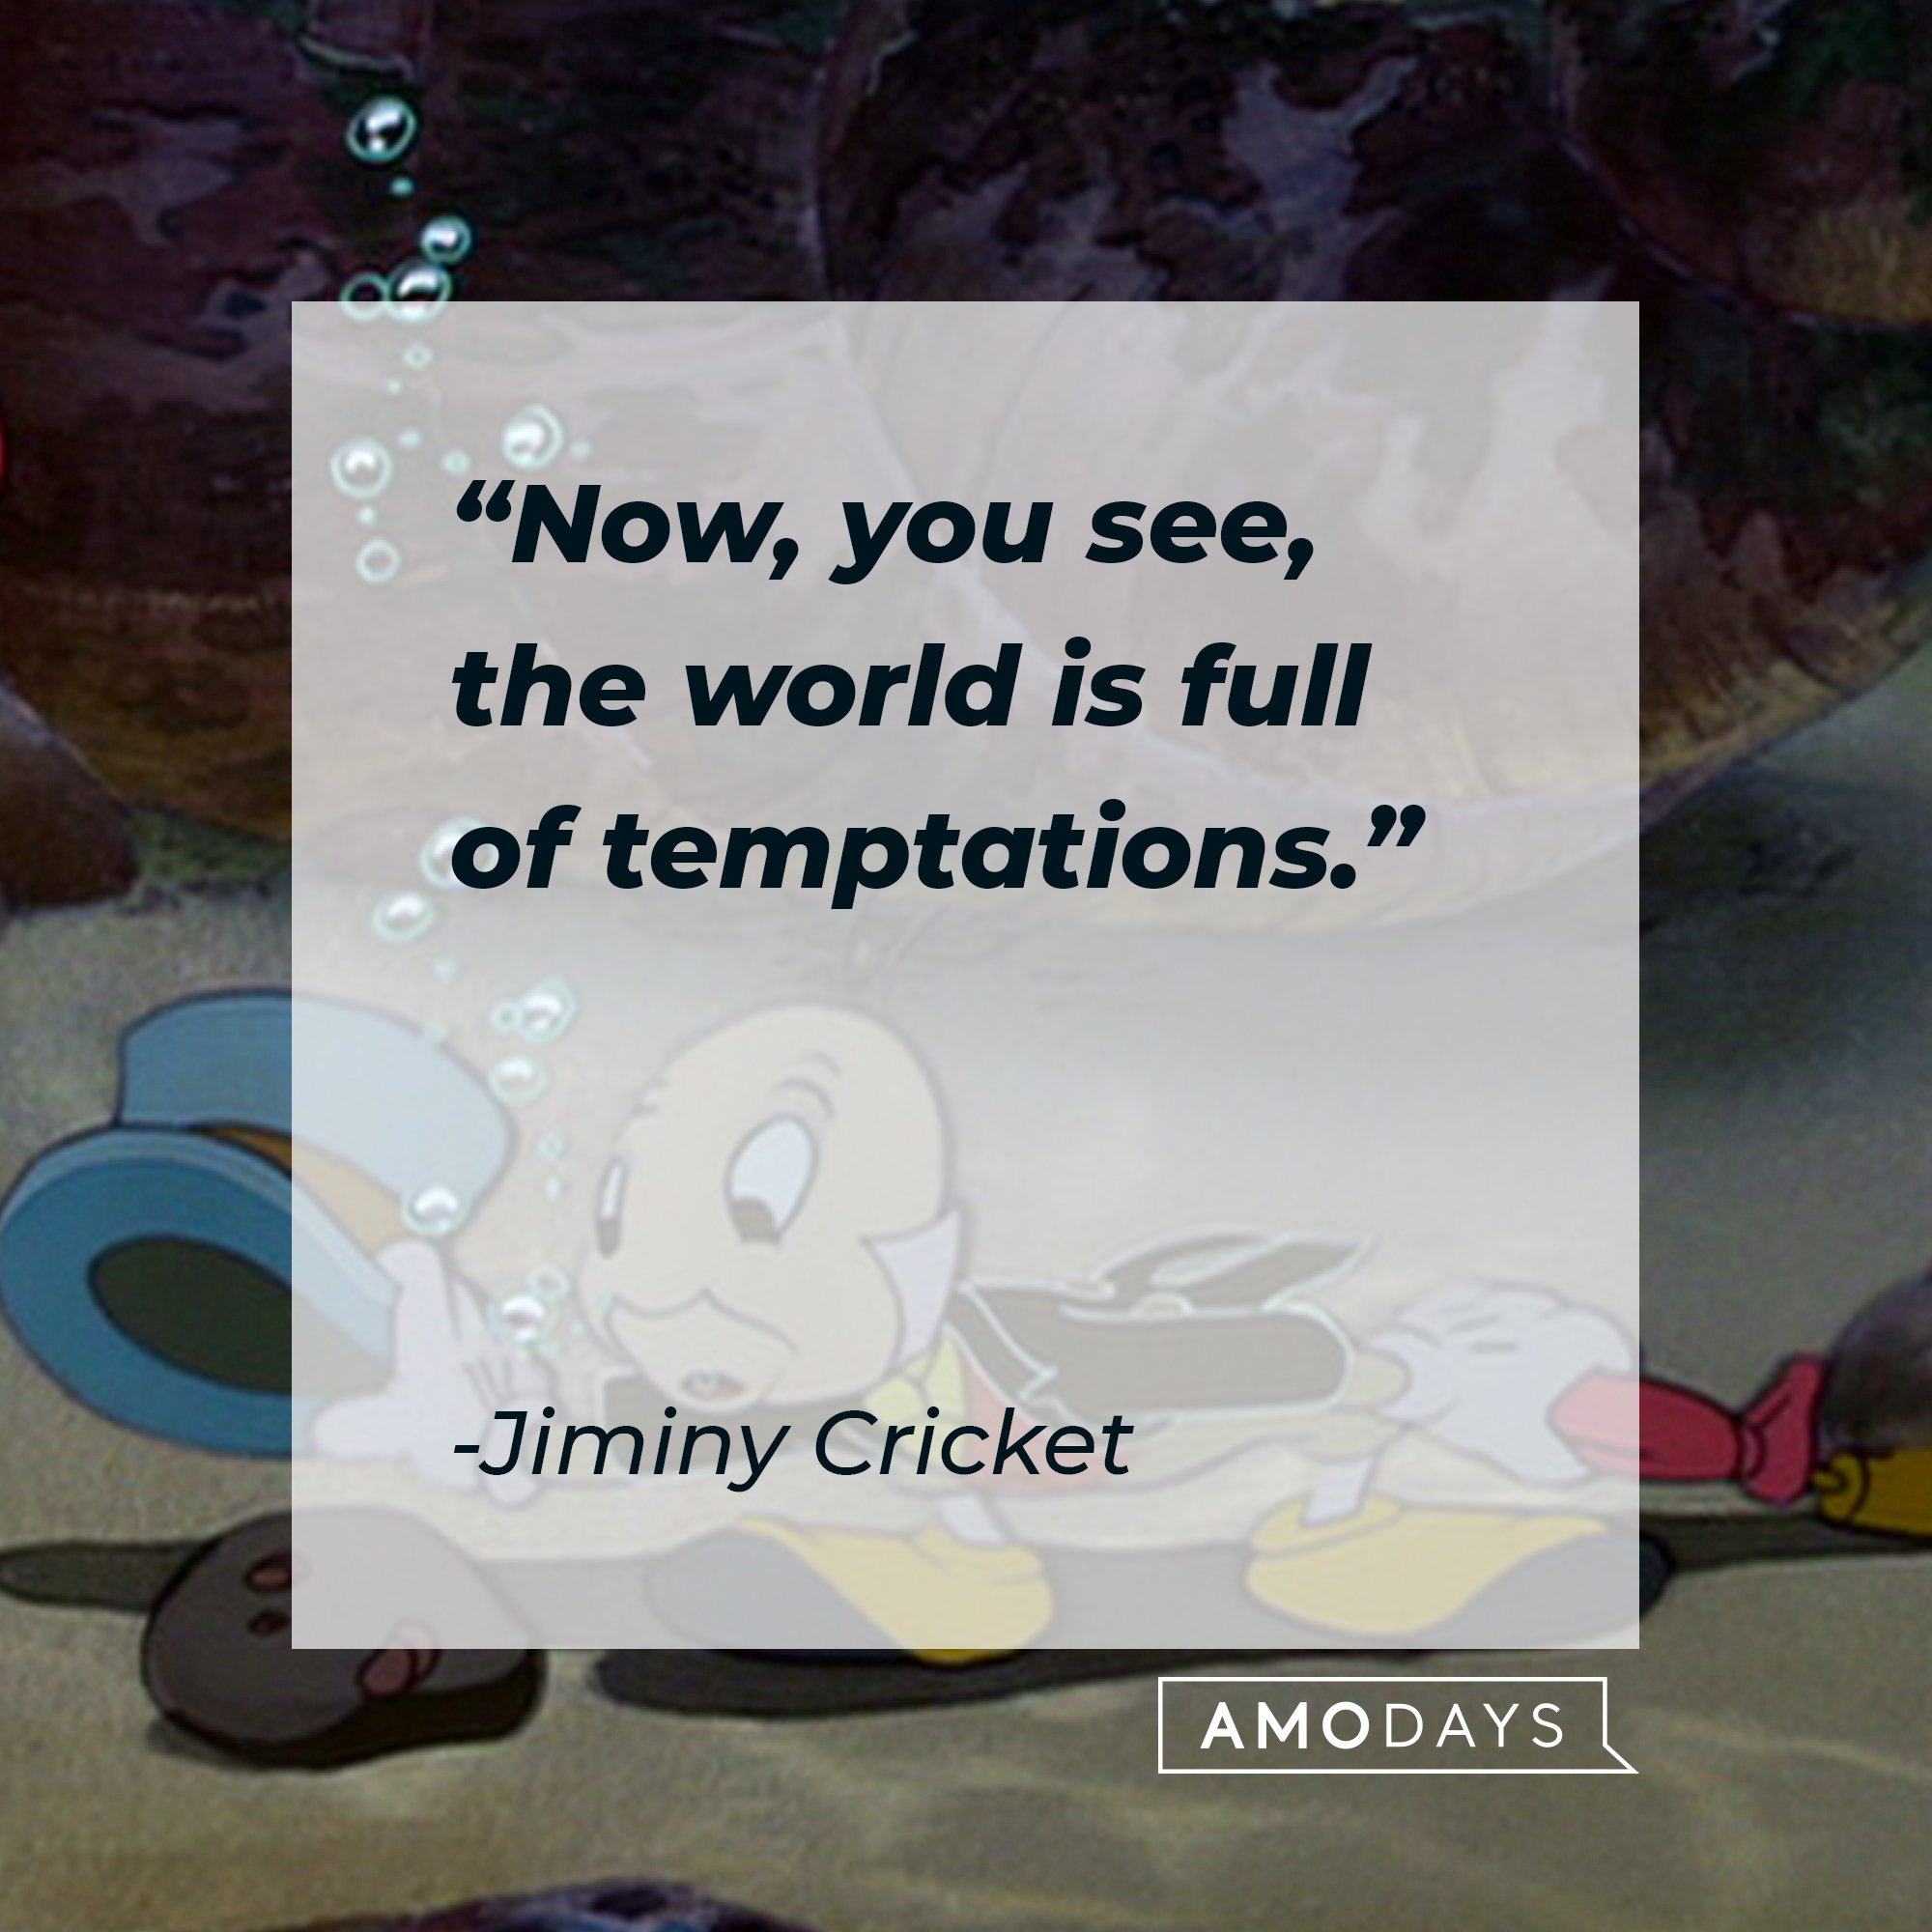  Jiminy Cricket's quote: "Now, you see, the world is full of temptations." |  Image: AmoDays